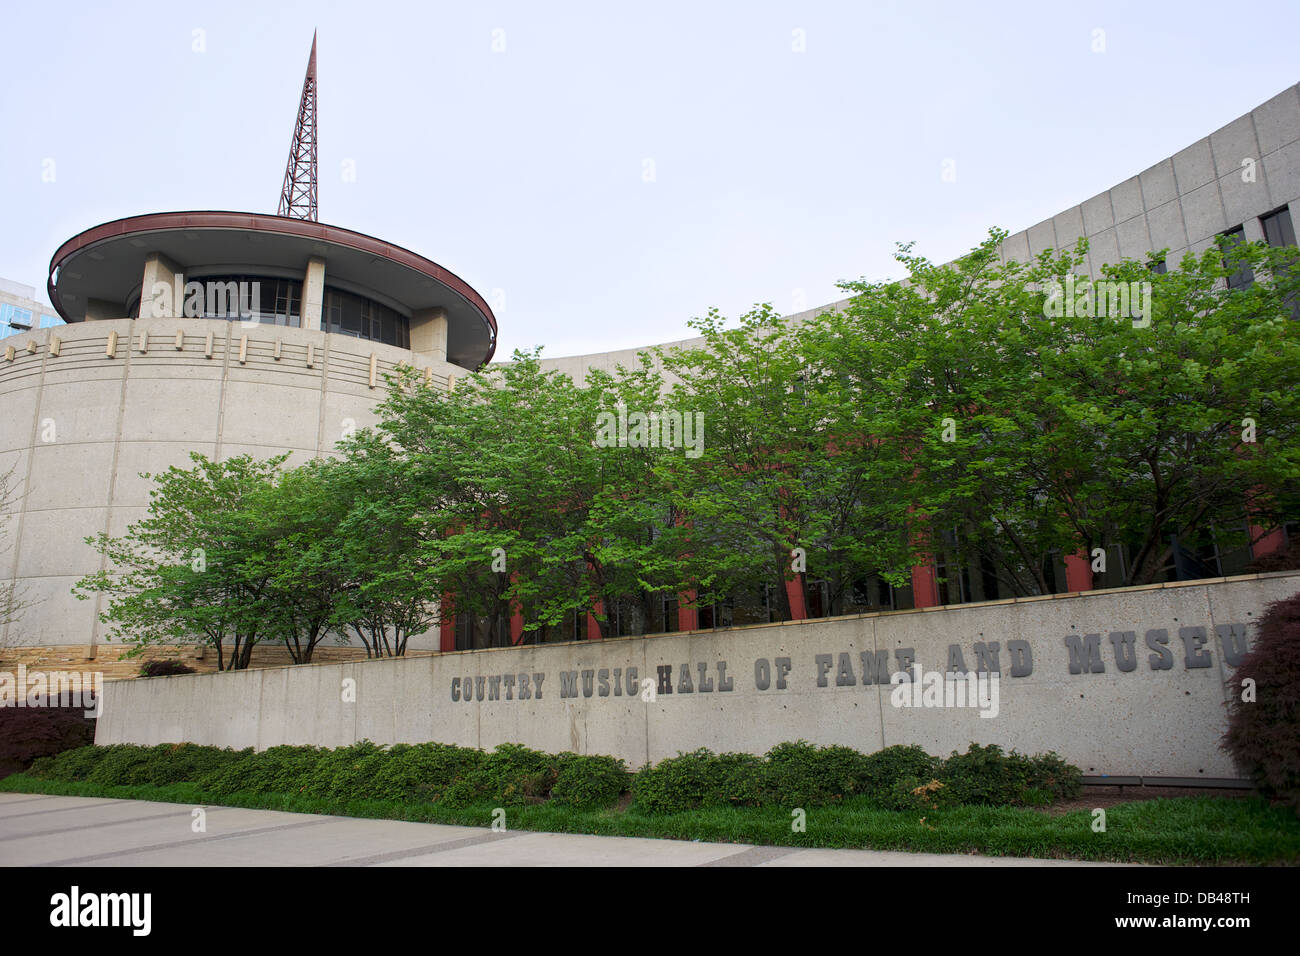 Country Music Hall of Fame e Museo, Nashville TN Foto Stock